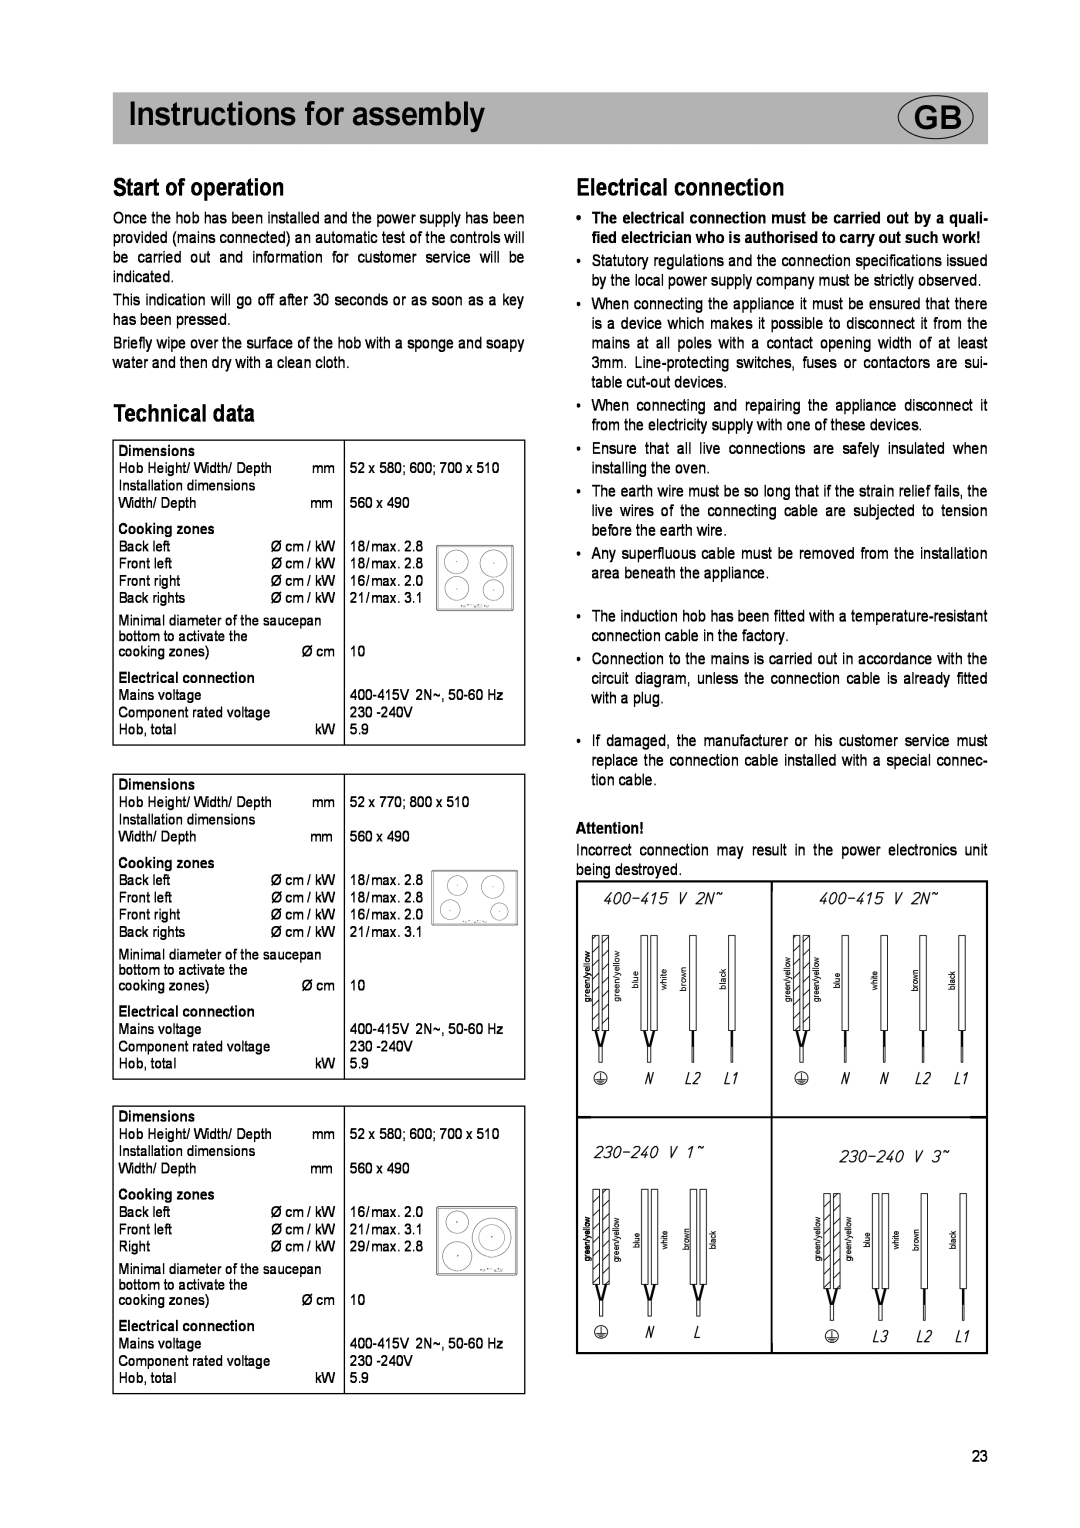 Smeg SE2732ID manual Start of operation, Technical data, Electrical connection, Instructions for assembly 